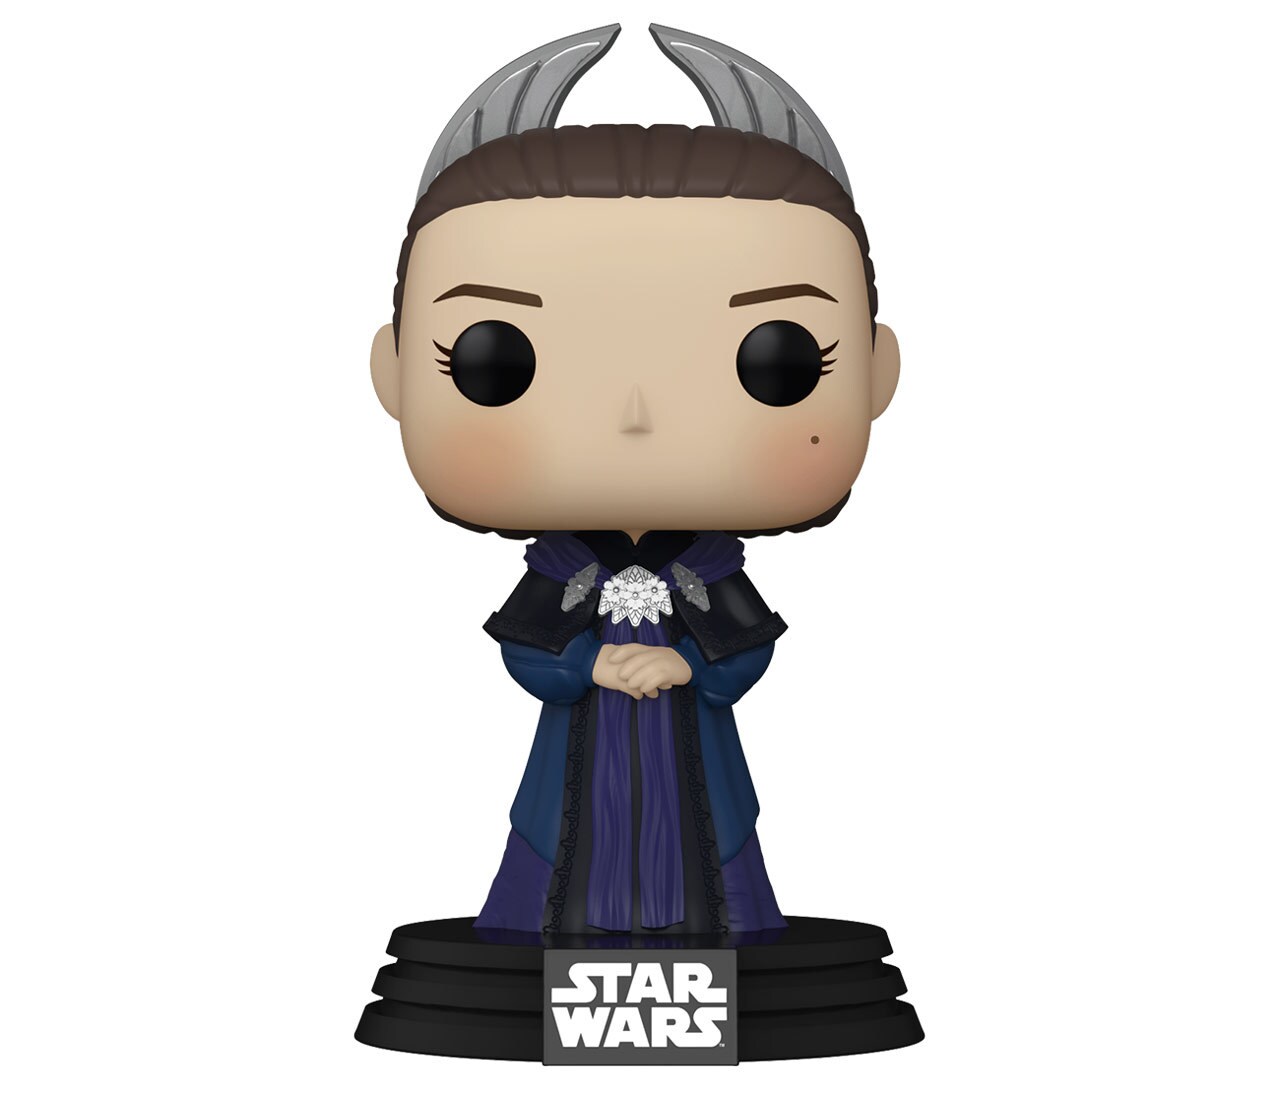  Padmé Pop! bobblehead figure out of package for “Power of the Galaxy”